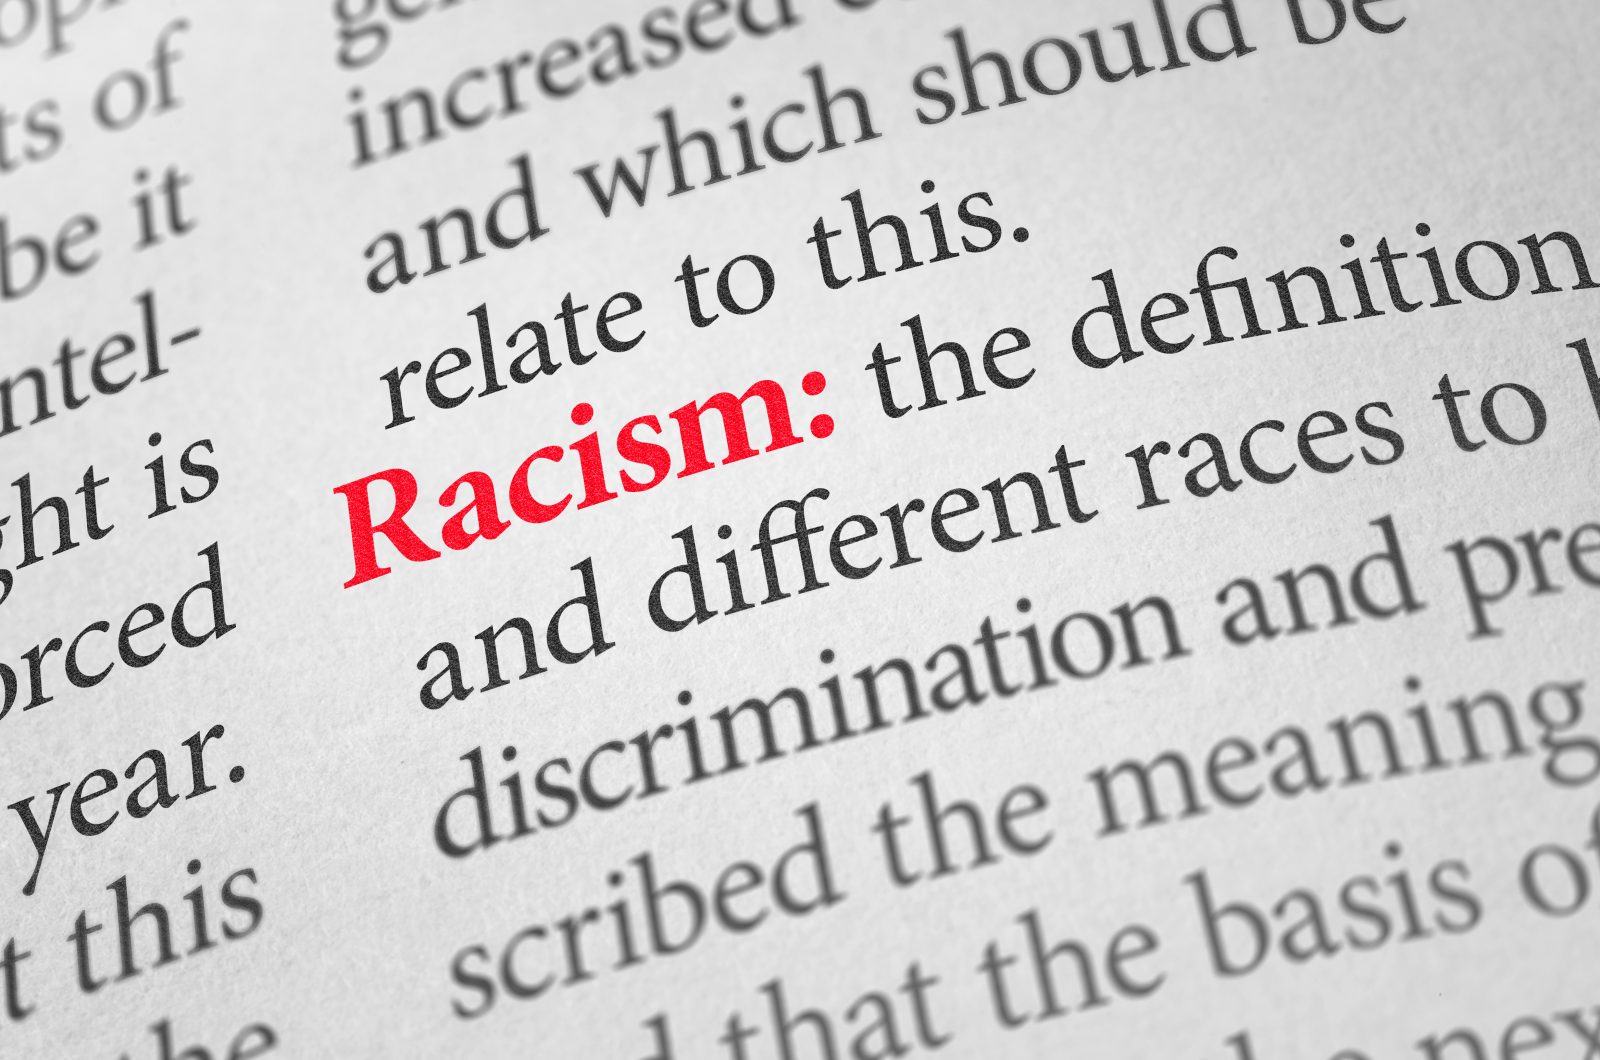 Definition of the word Racism in a dictionary